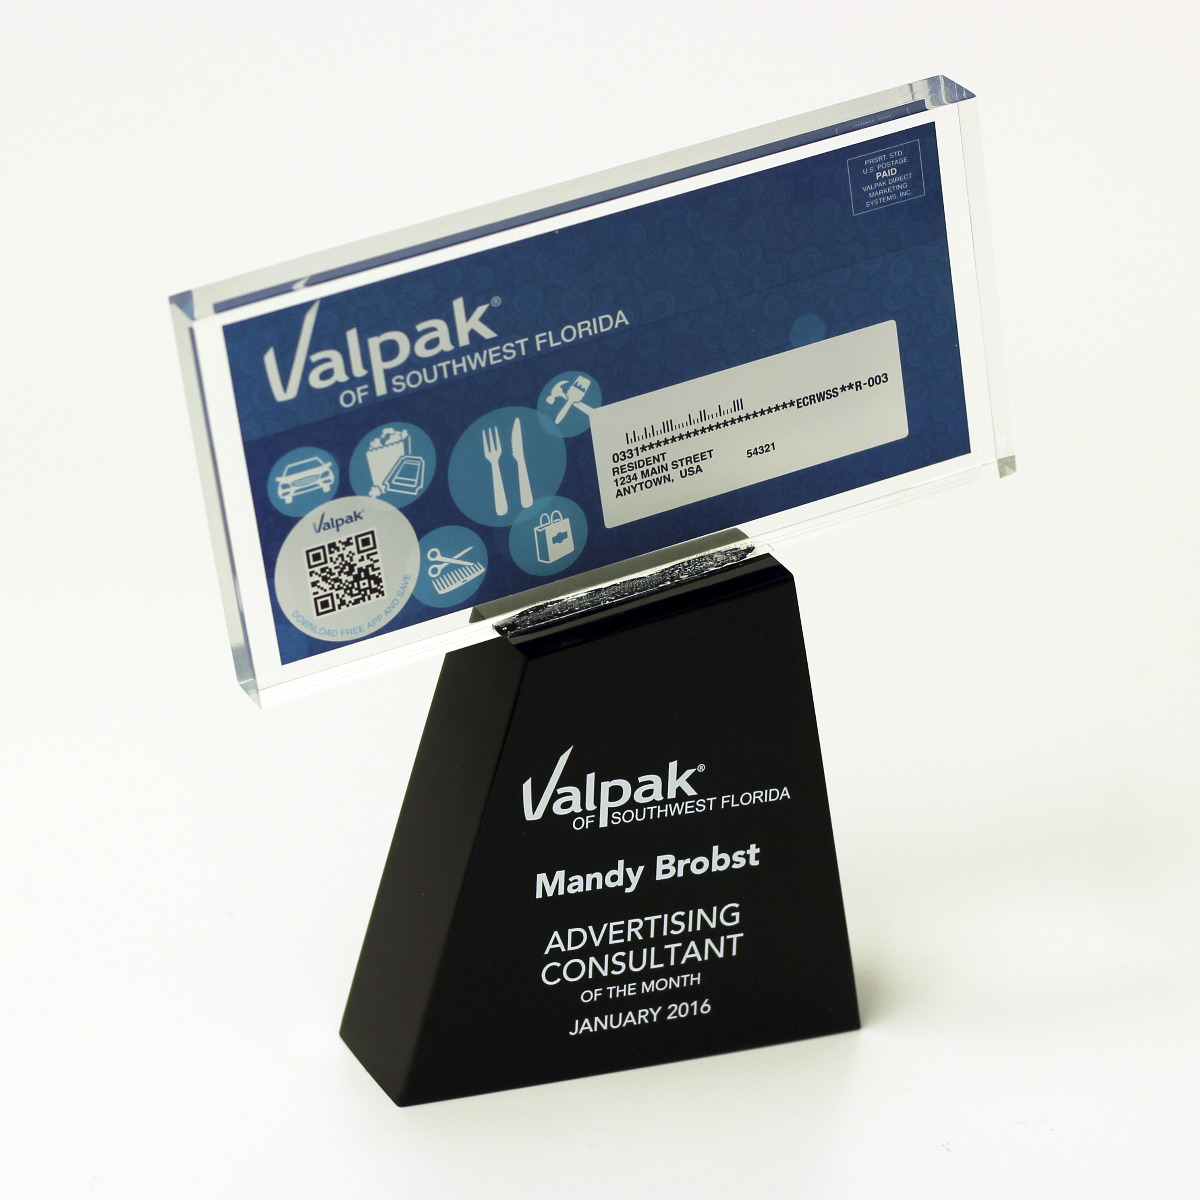 Custom Lucite award in shape of money coupon on a base for valpac award